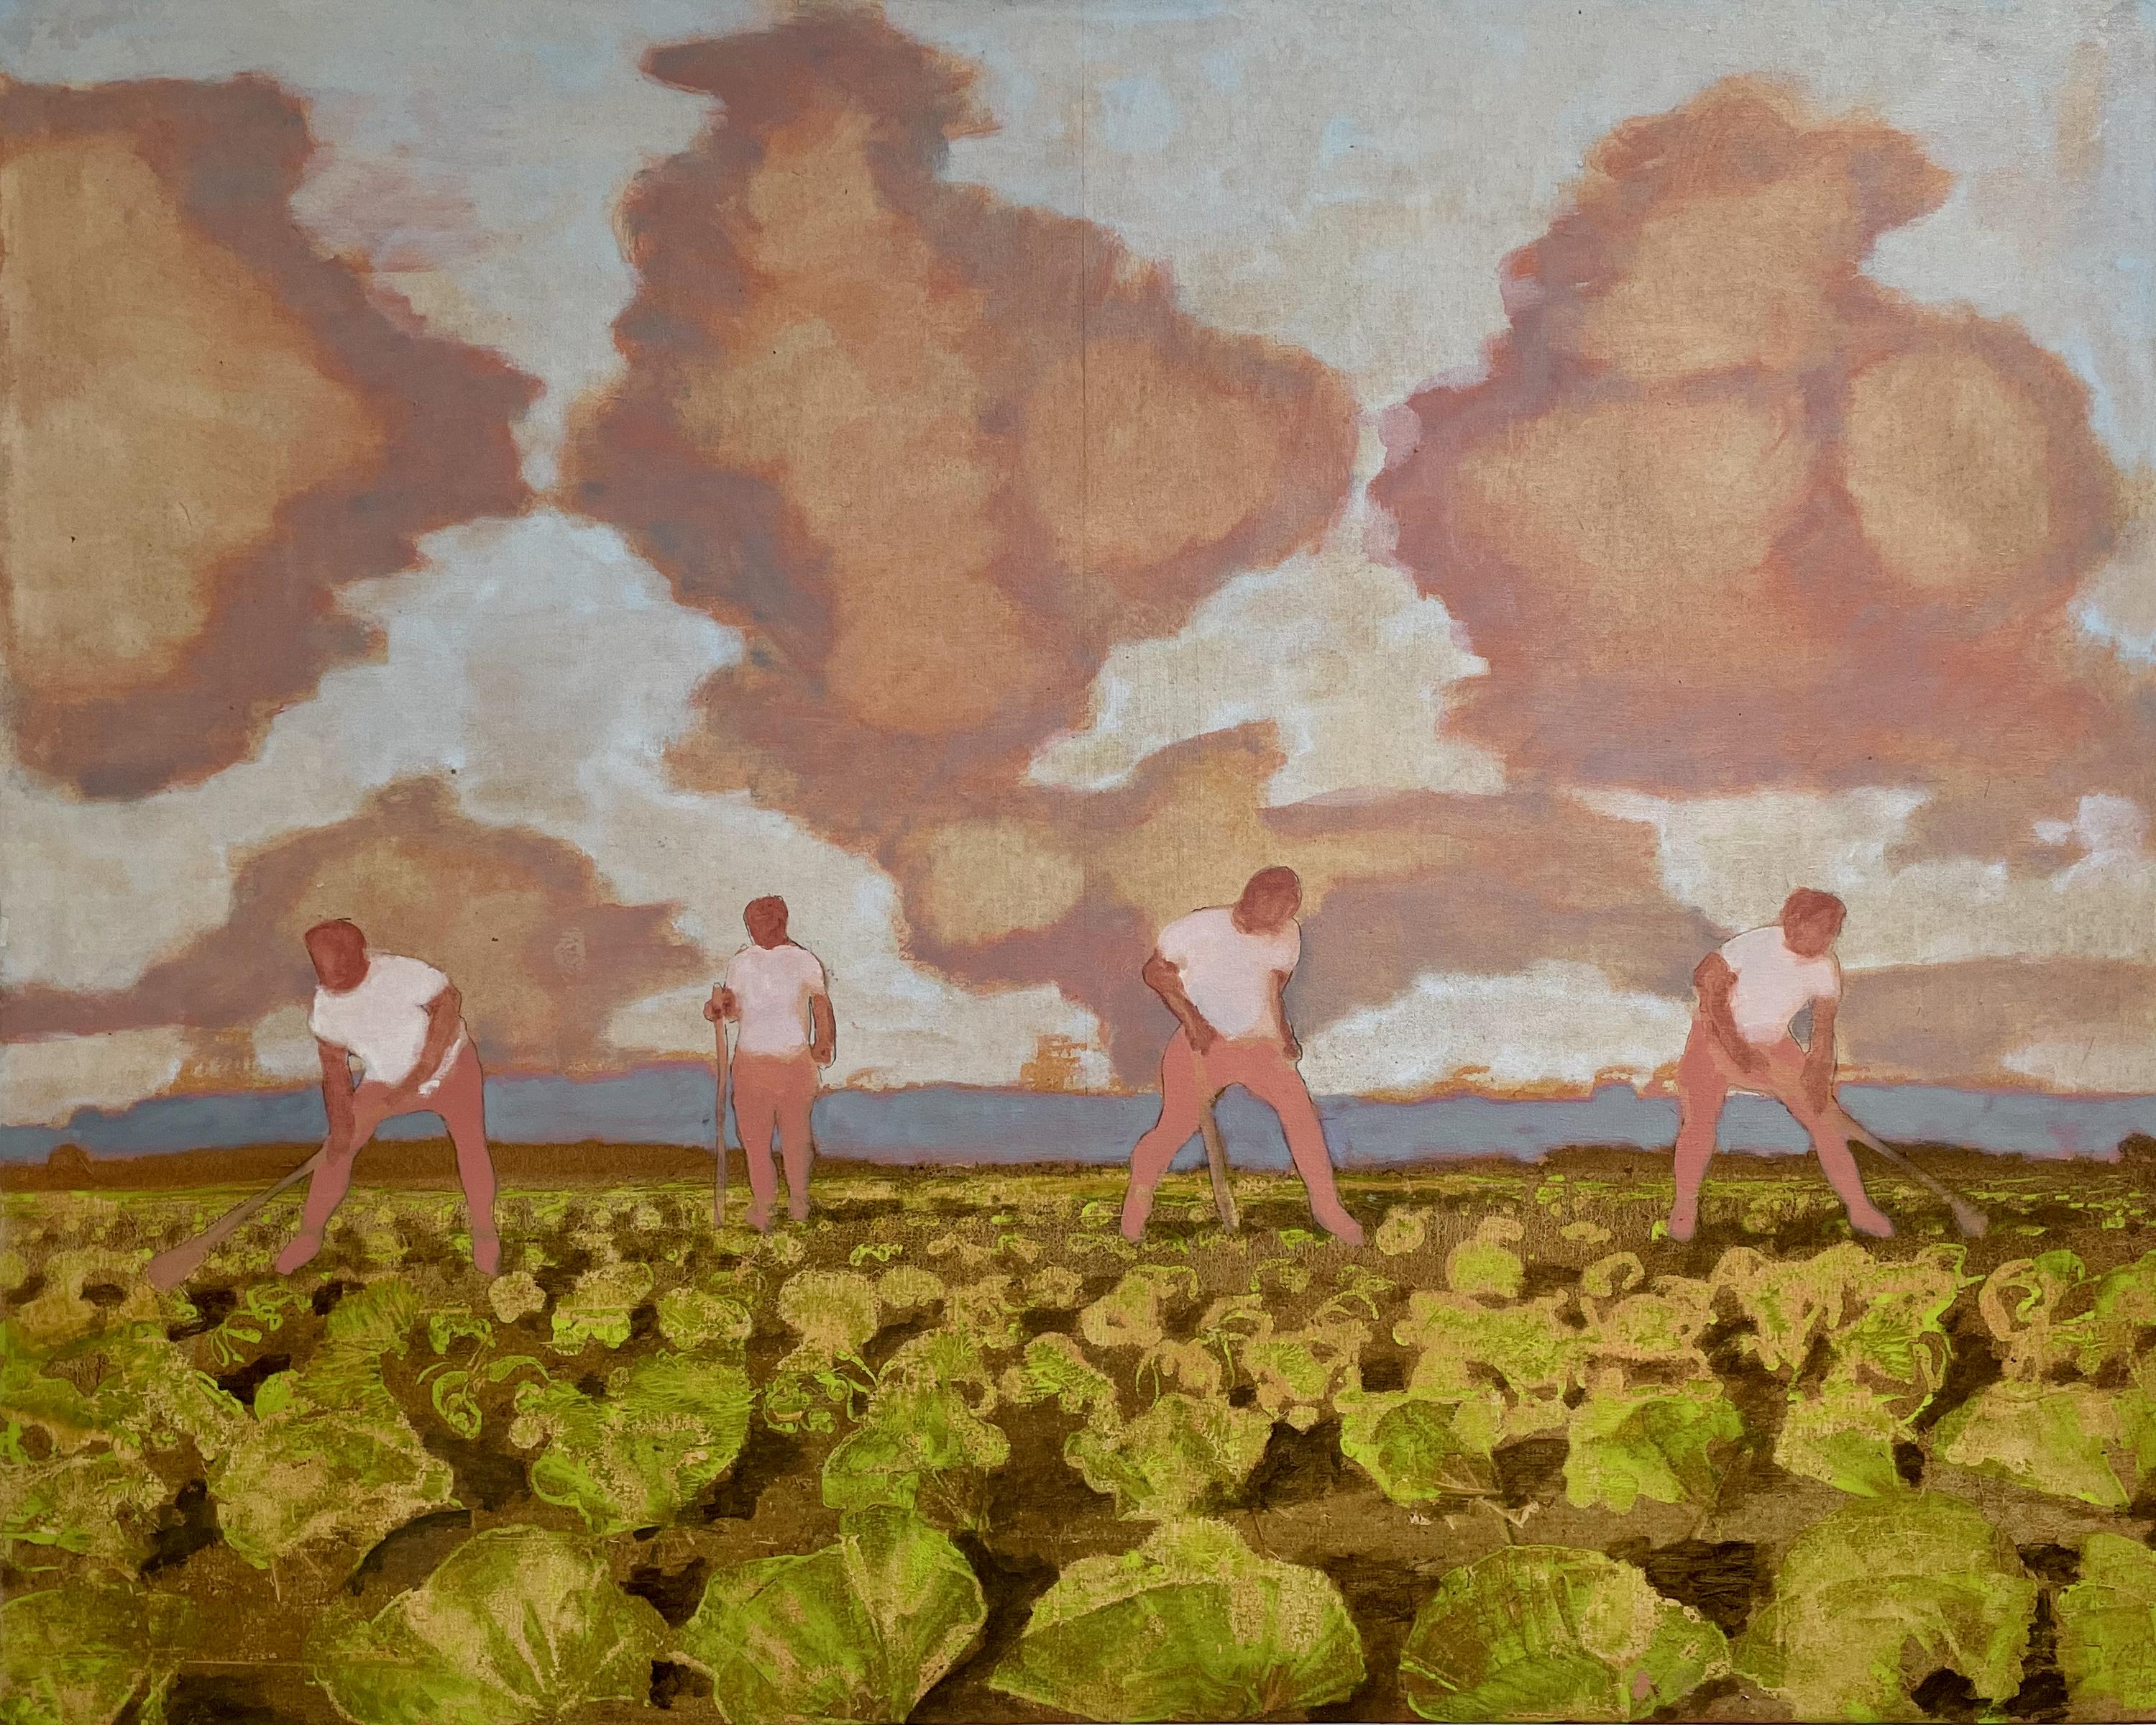 David Konigsberg Landscape Painting - Cabbage Field, Farmers in Green and Ochre Vegetable Field, Gray, Salmon Pink Sky